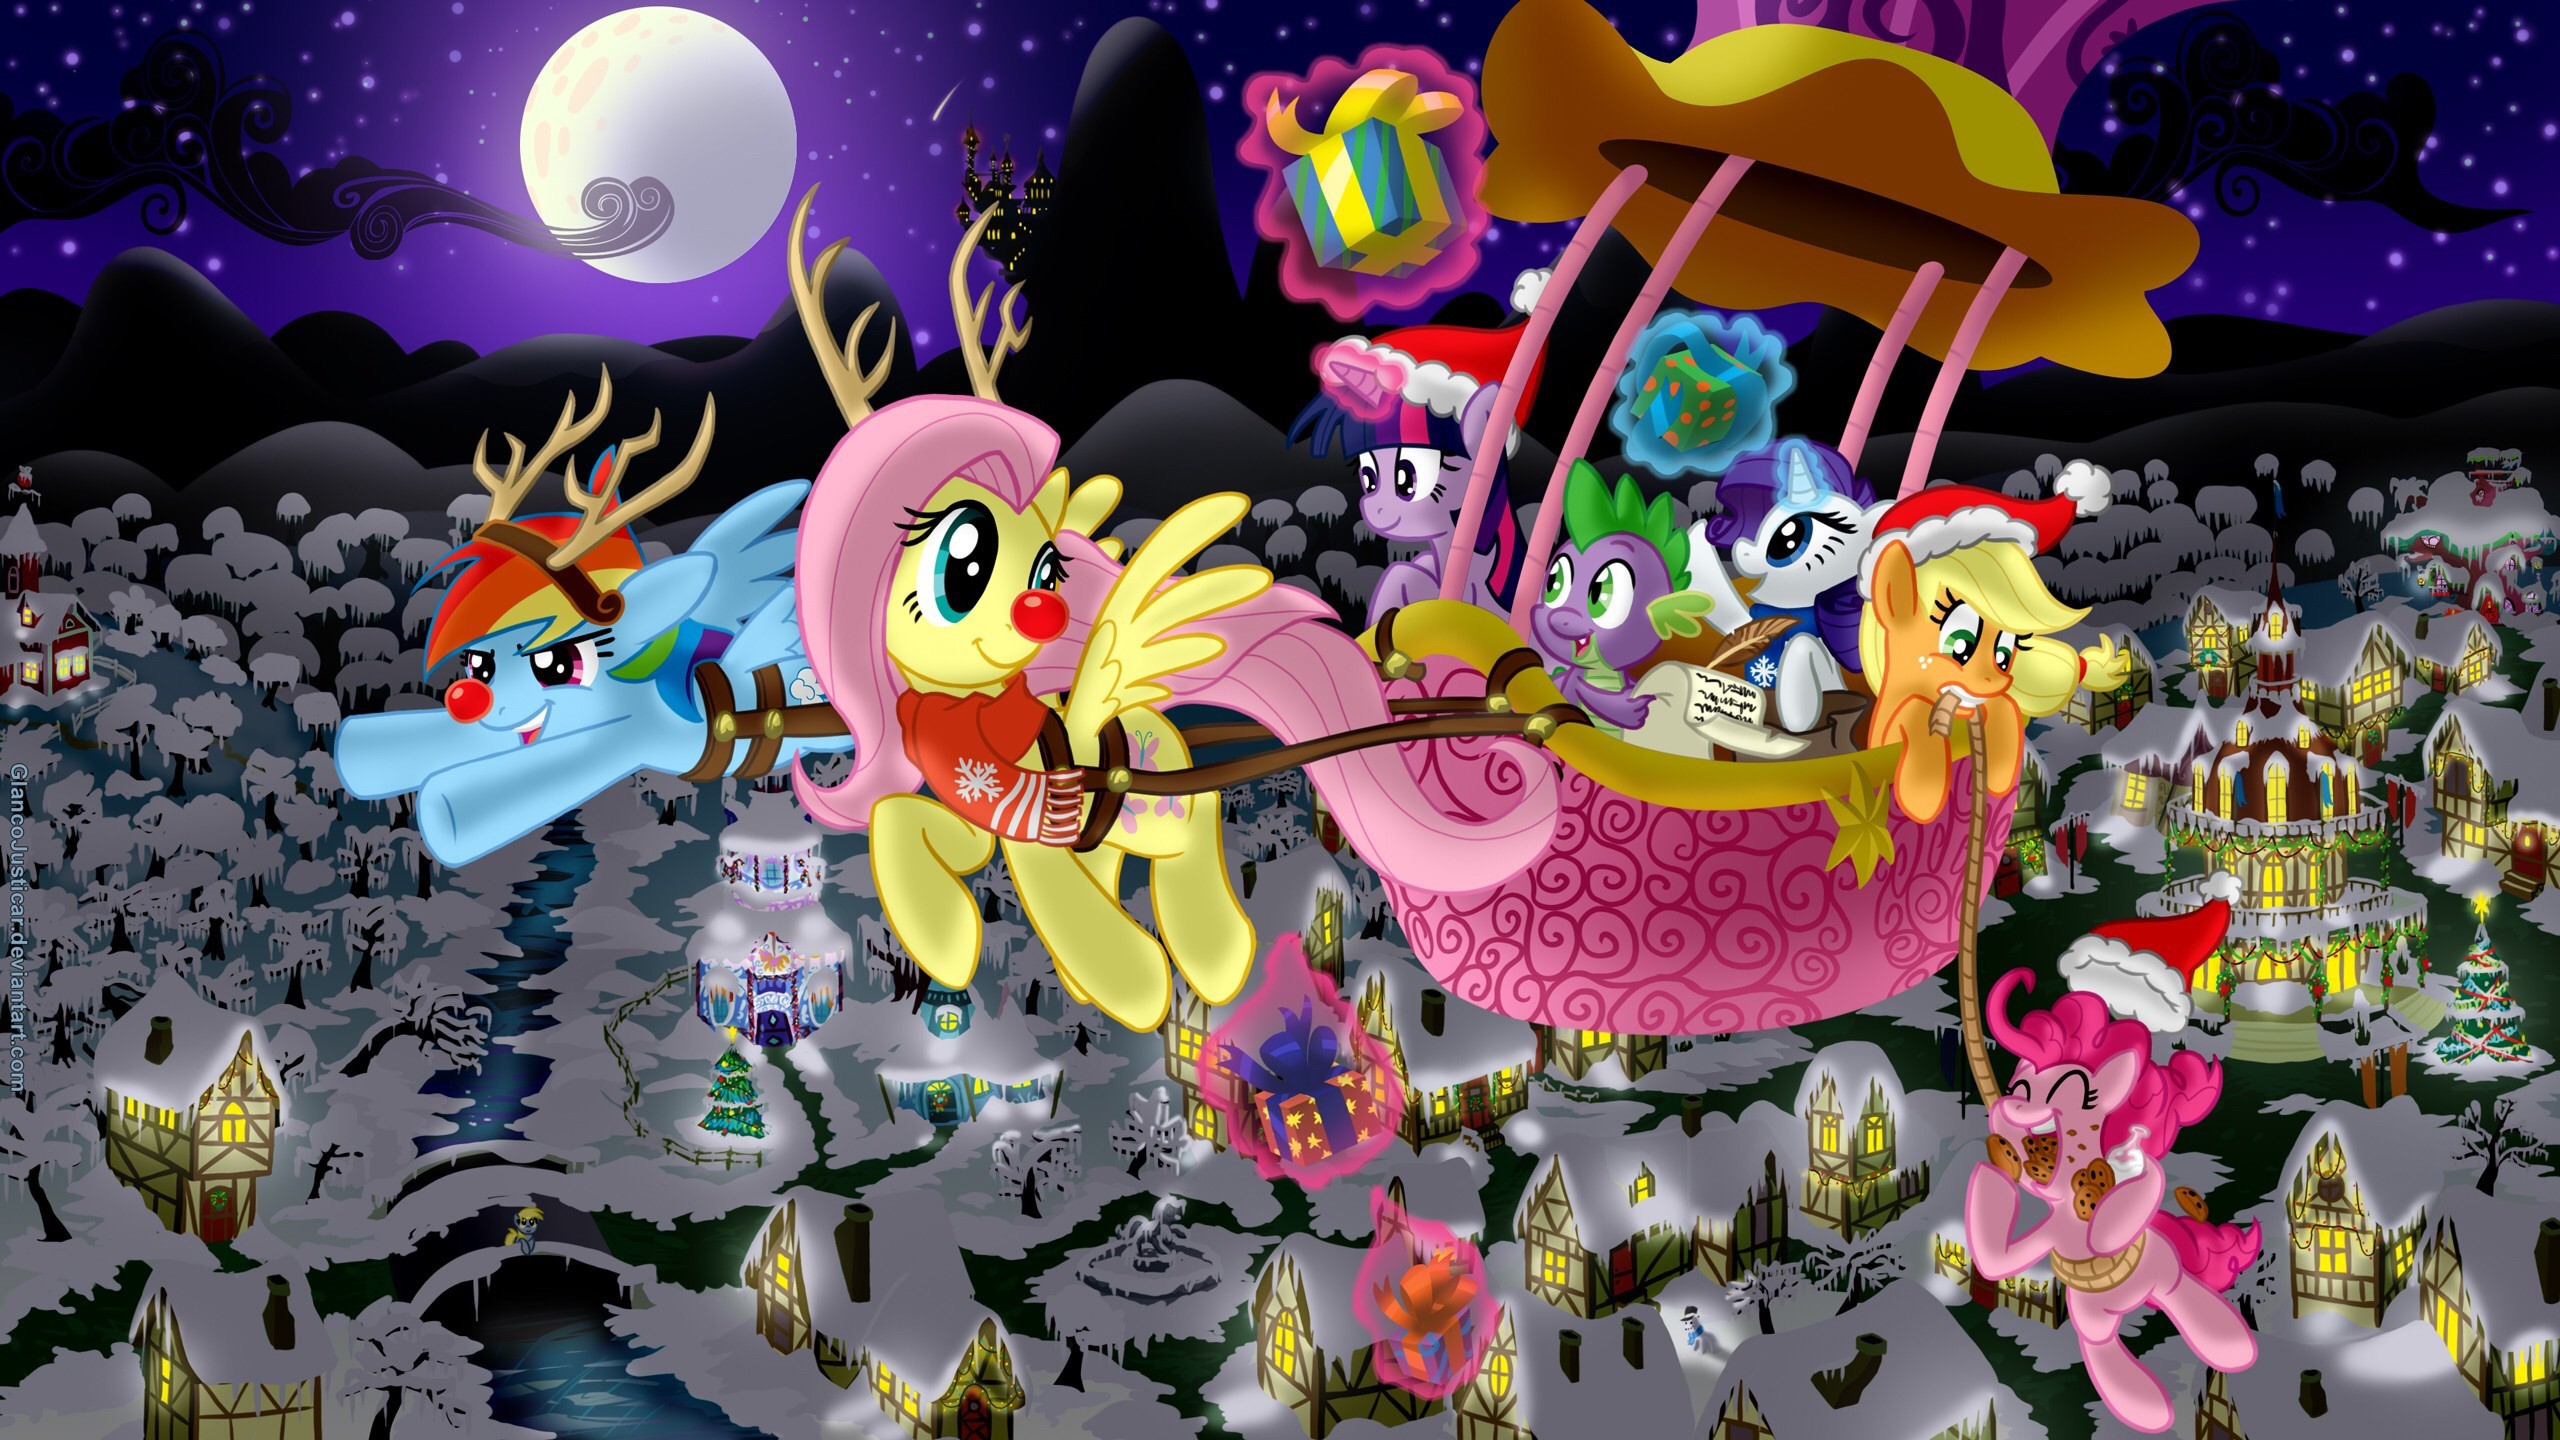 2560x1440 My Little Pony Friendship is Magic images Merry Christmas HD wallpaper and  background photos